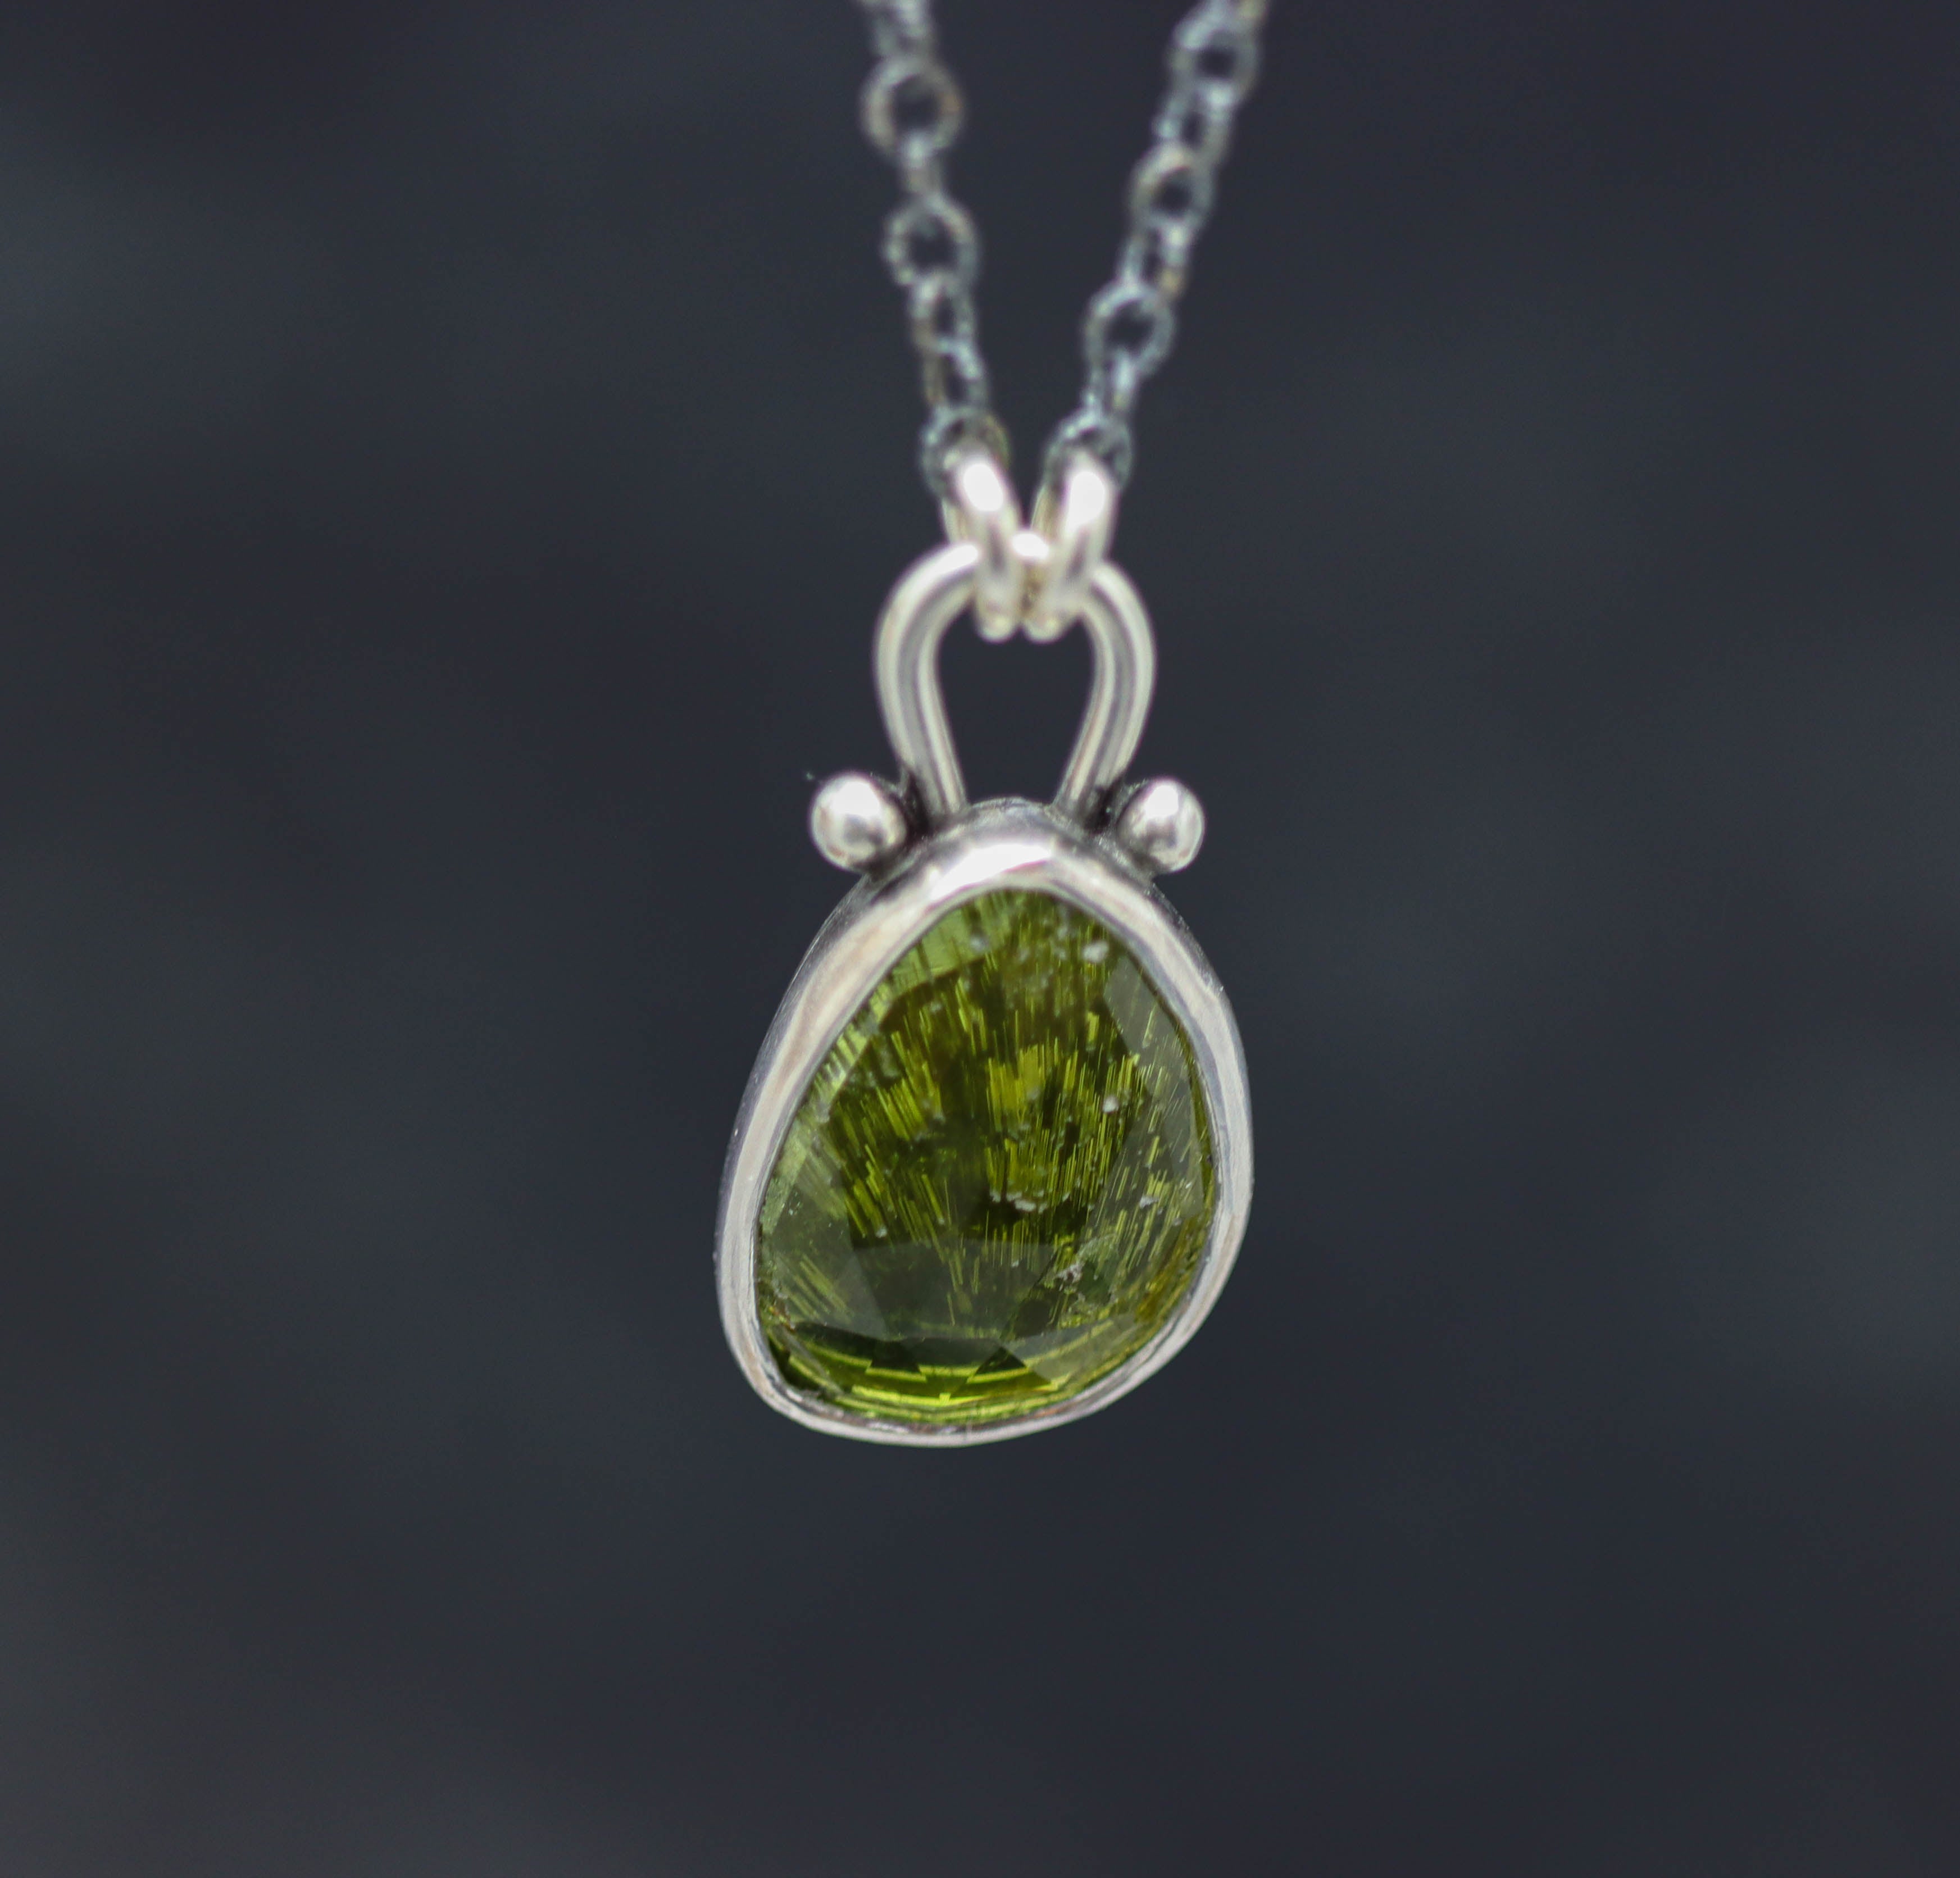 Totally Awesome Green Tourmaline Pendant Necklace Sterling Silver